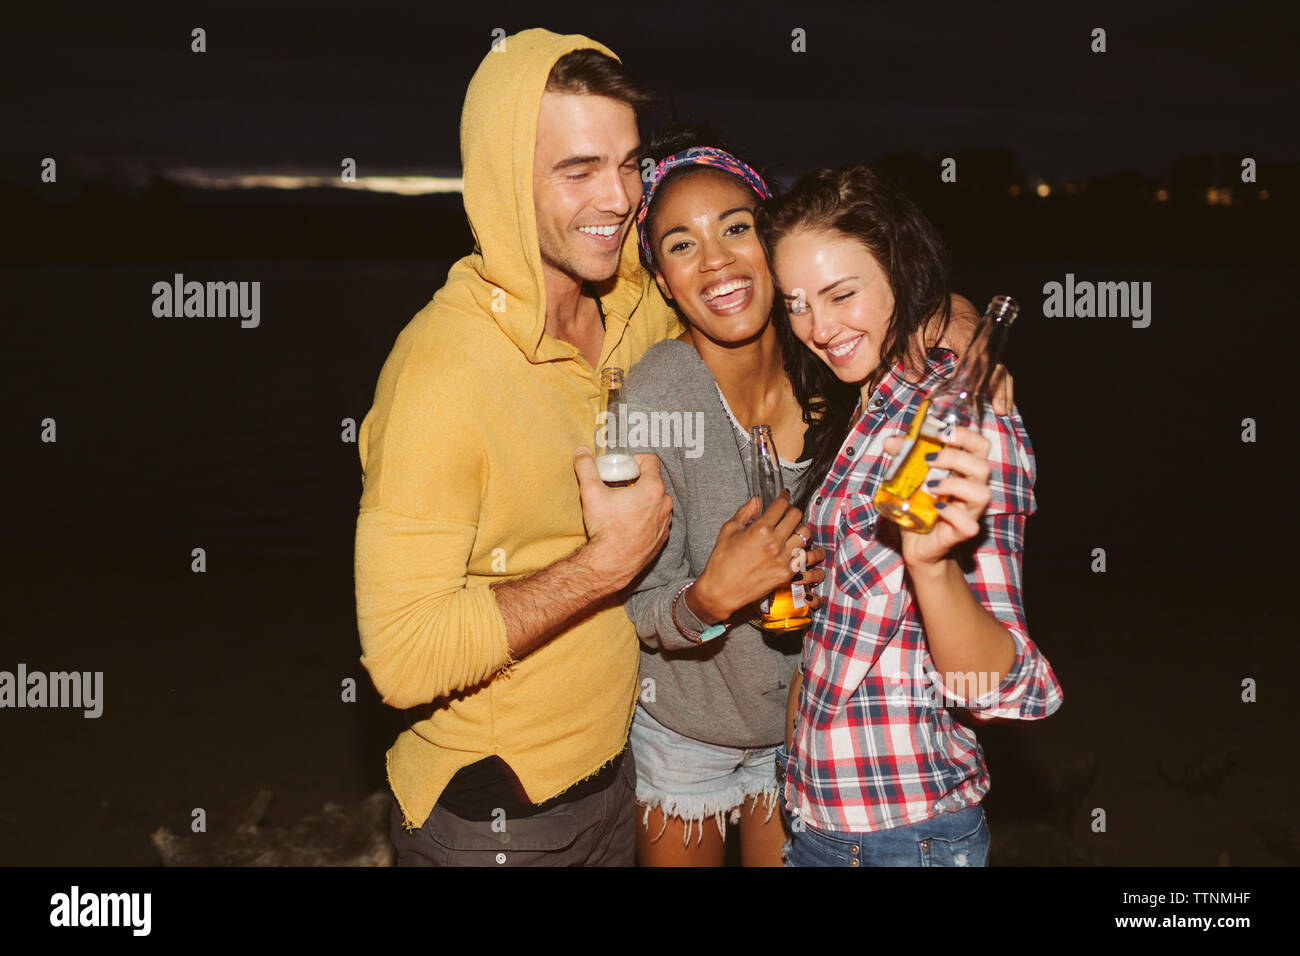 Smiling friends with arm around holding bottles while standing by river at night Stock Photo